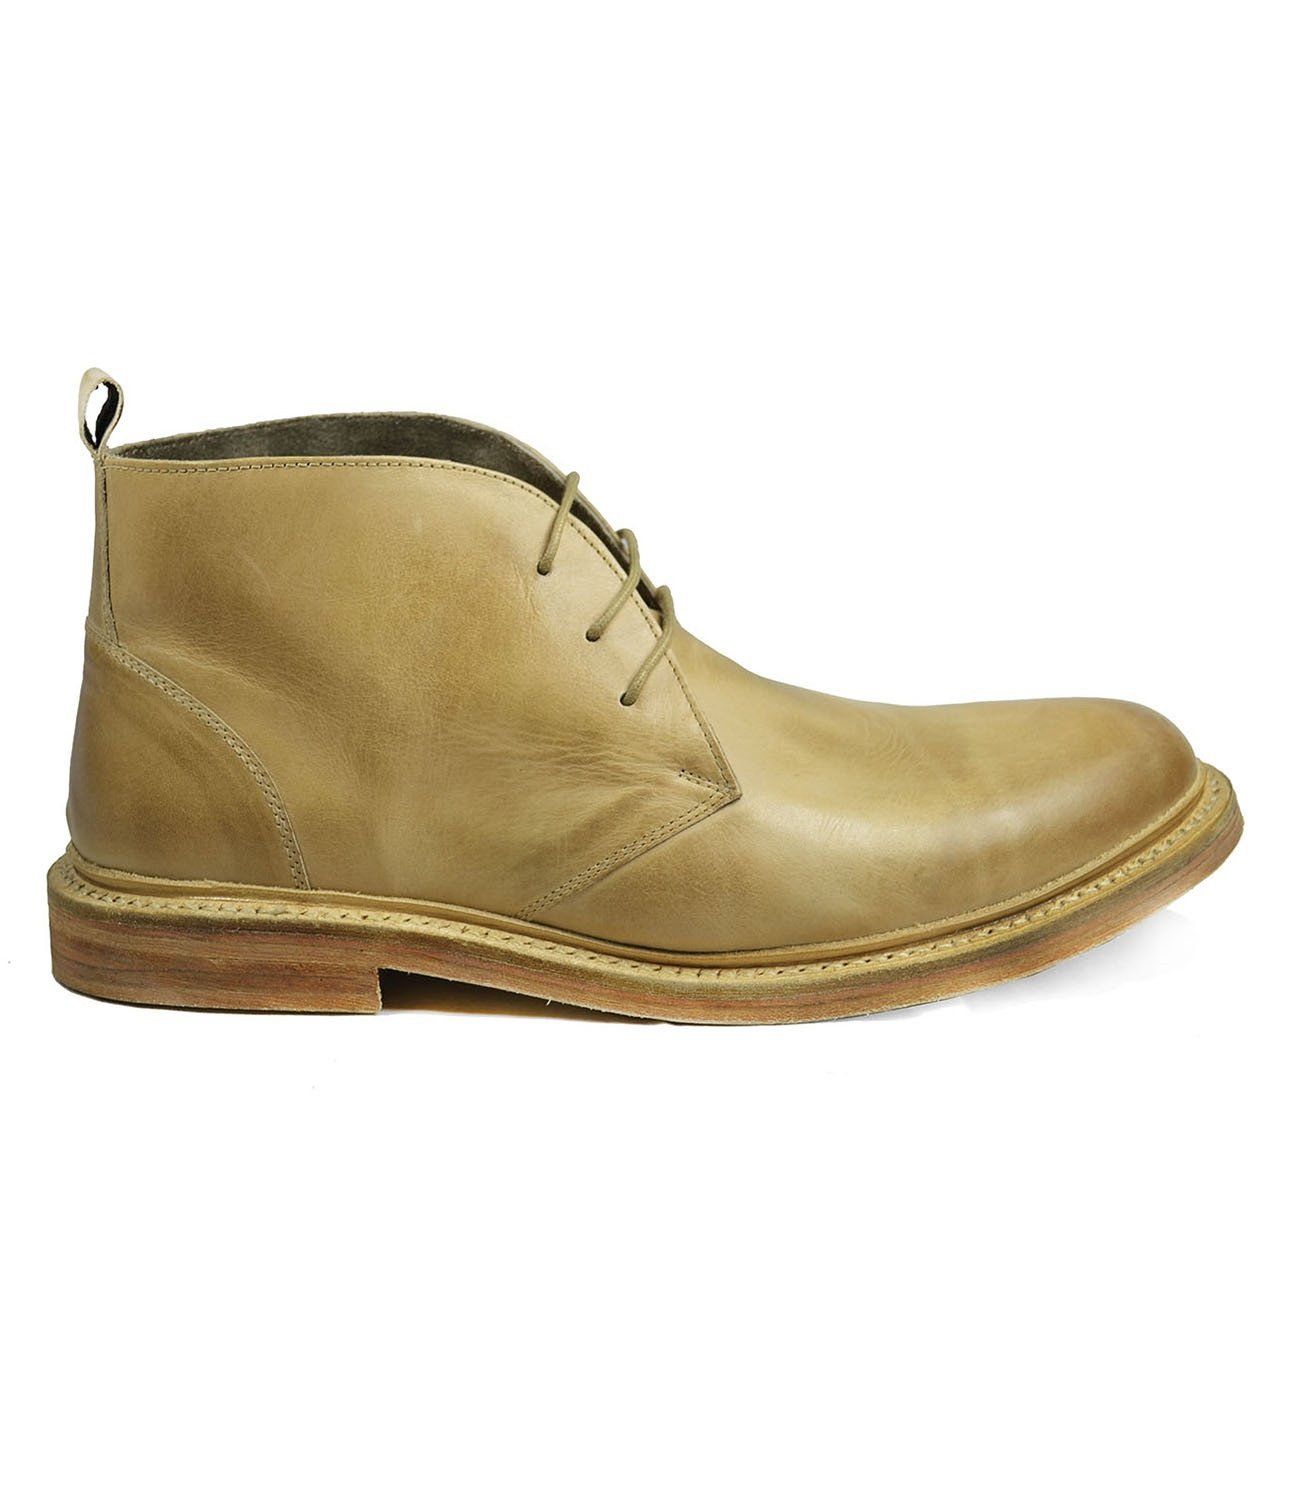 SHELTON Ivory Cap Toe Leather Boots by Paul Malone